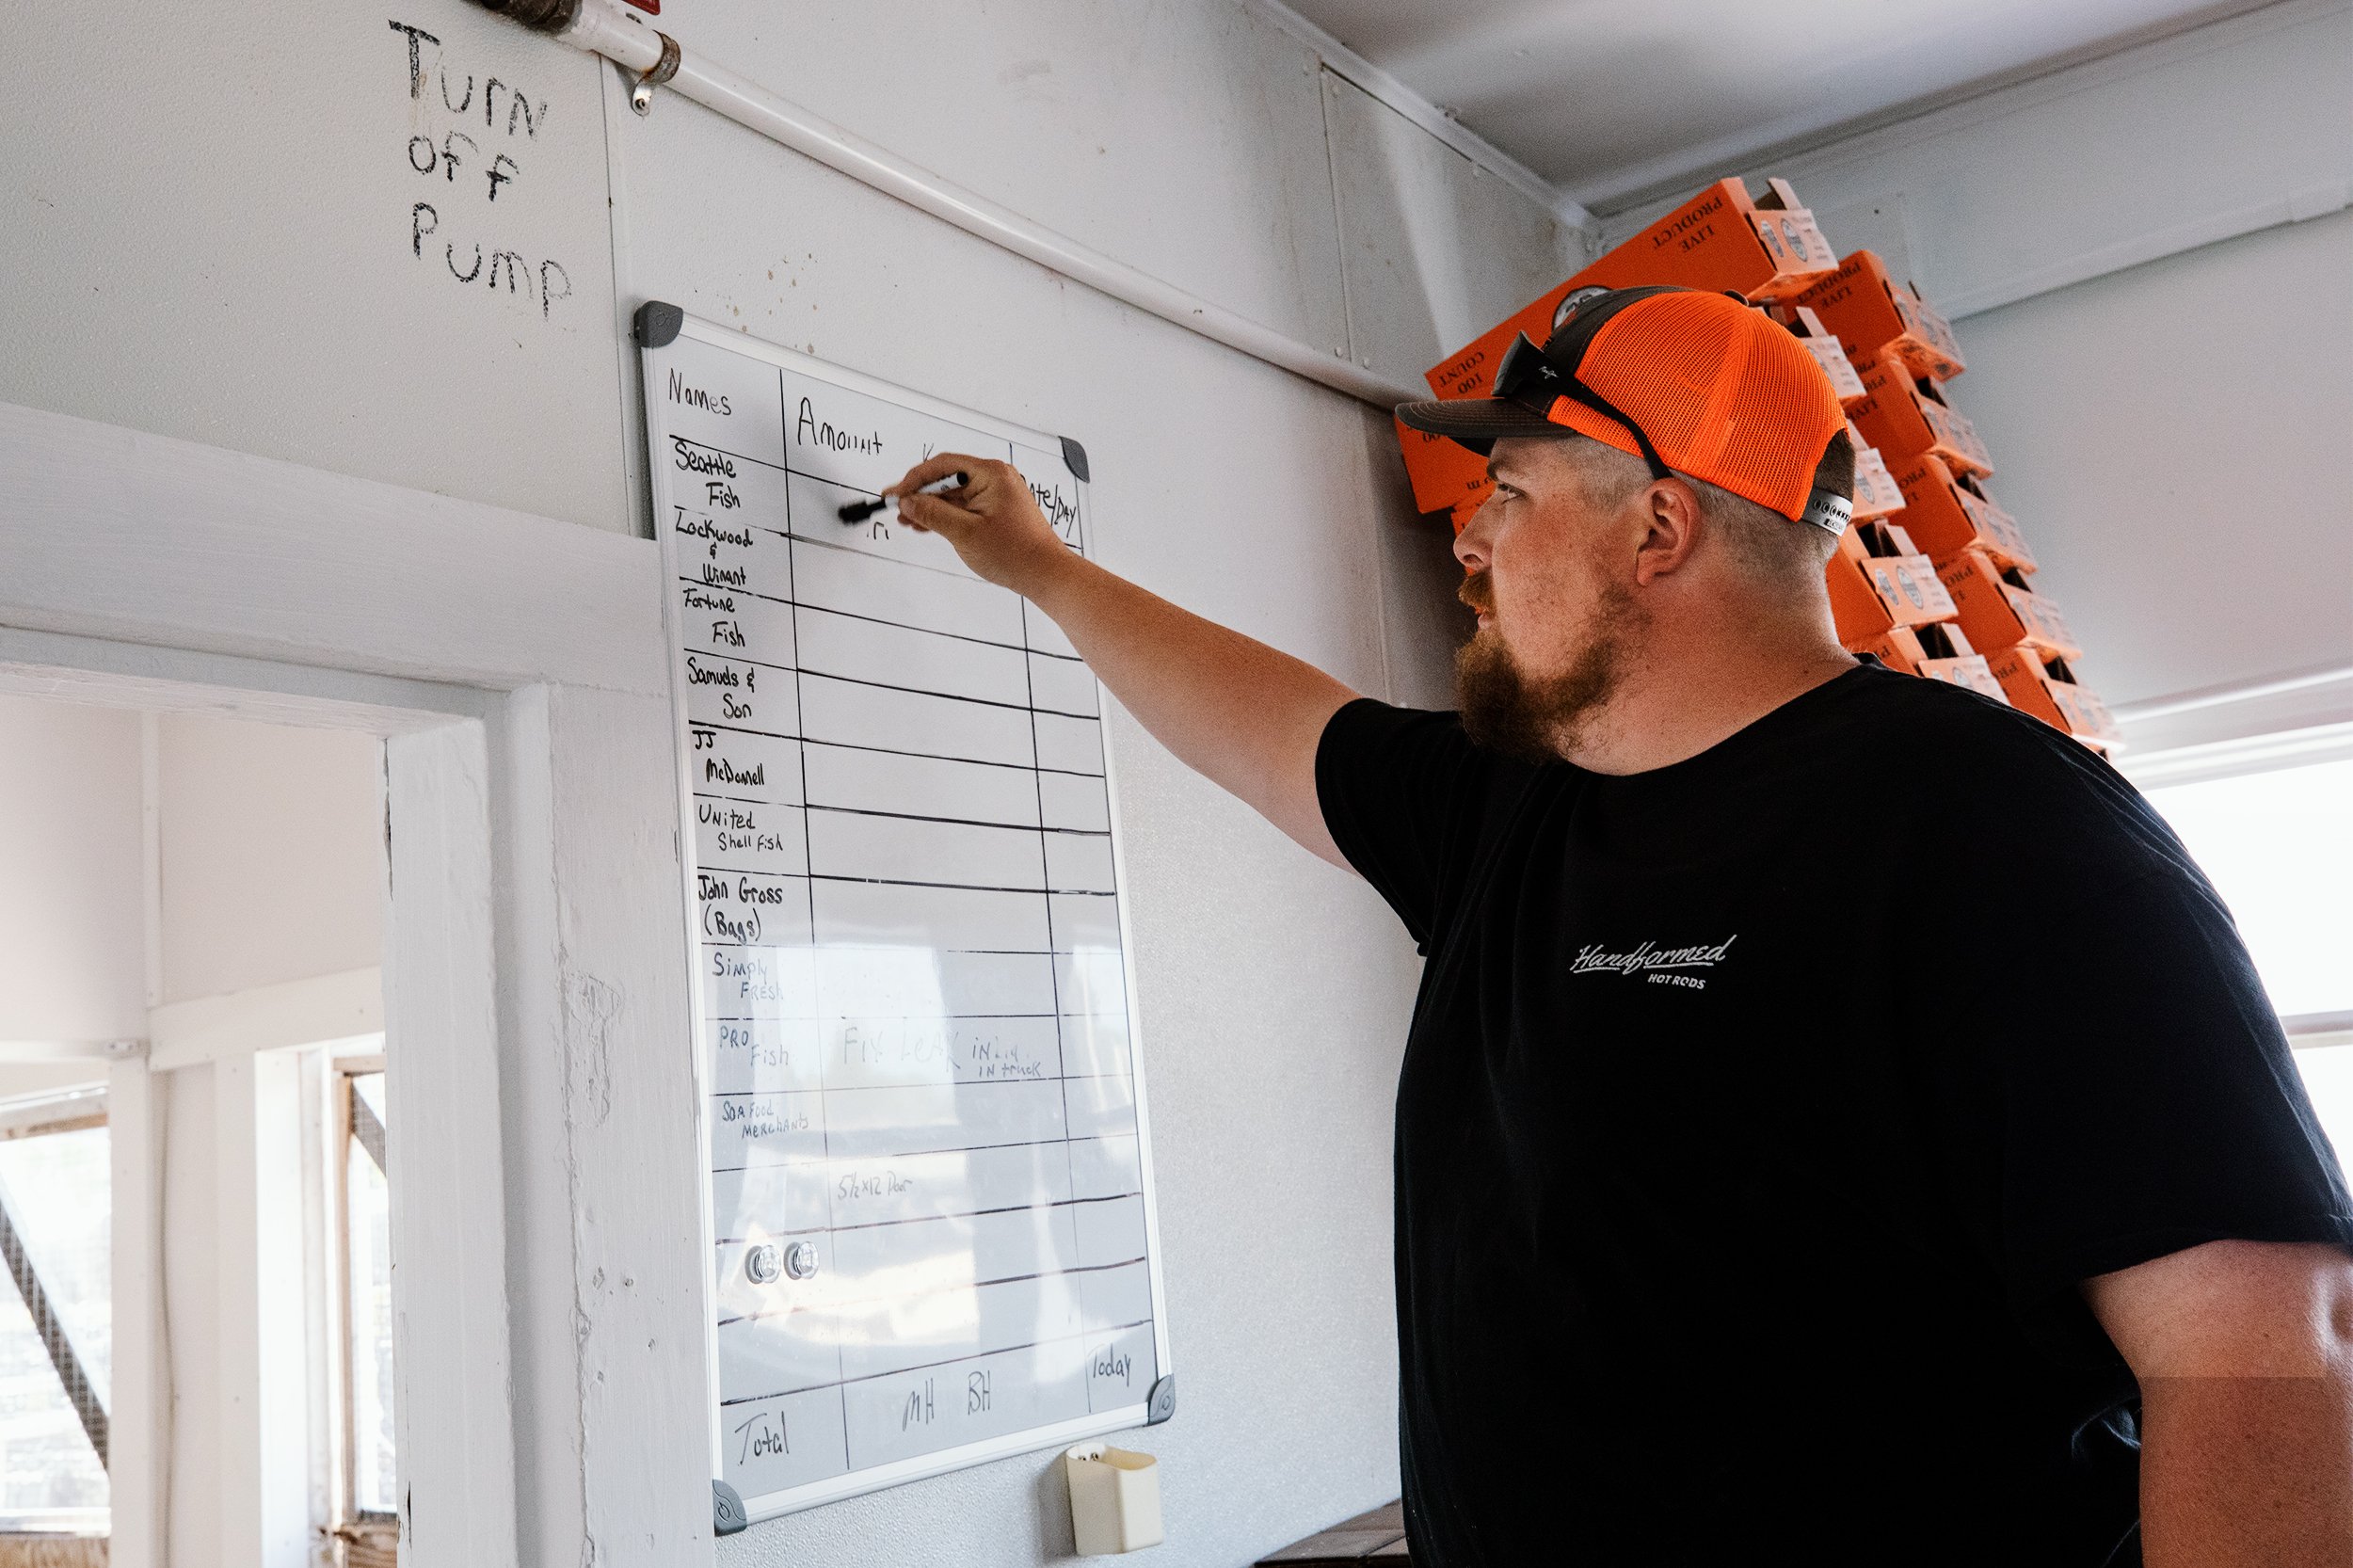  Scott Robinson Jr. erases the whiteboard used to list oyster orders at Madhouse Oysters, an oyster farming company on Hoopers Island, Md. Since Covid-19 struck, restaurant closures and menu reductions have reduced the demand for live oysters and led